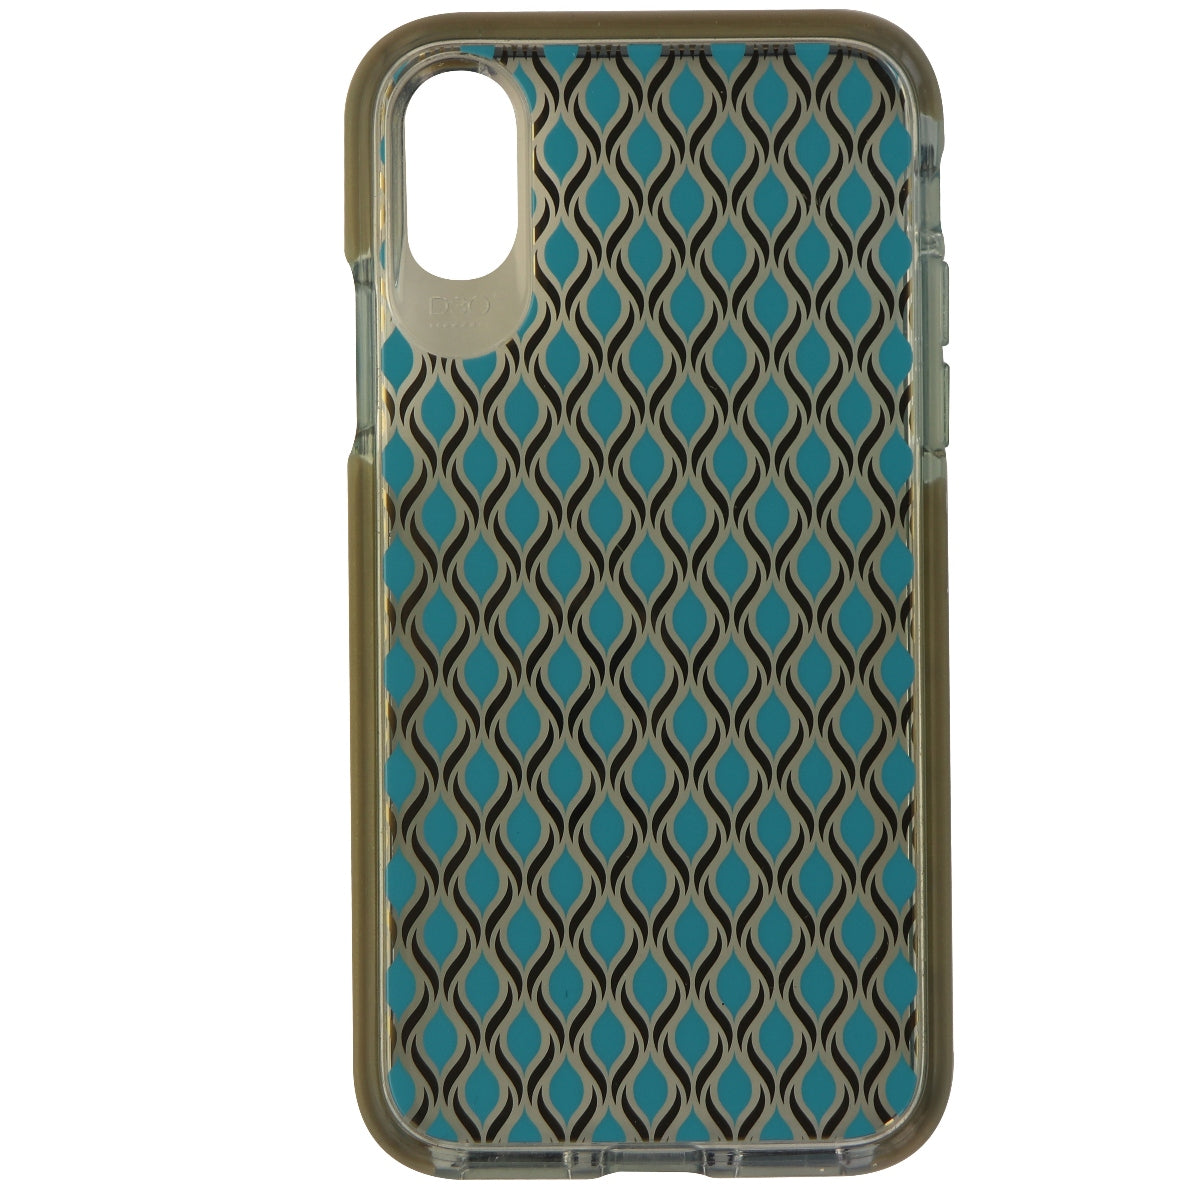 Gear4 Victoria Hybrid Hard Case Cover for iPhone X 10 - Teal/Silver Pattern Cell Phone - Cases, Covers & Skins Gear4    - Simple Cell Bulk Wholesale Pricing - USA Seller